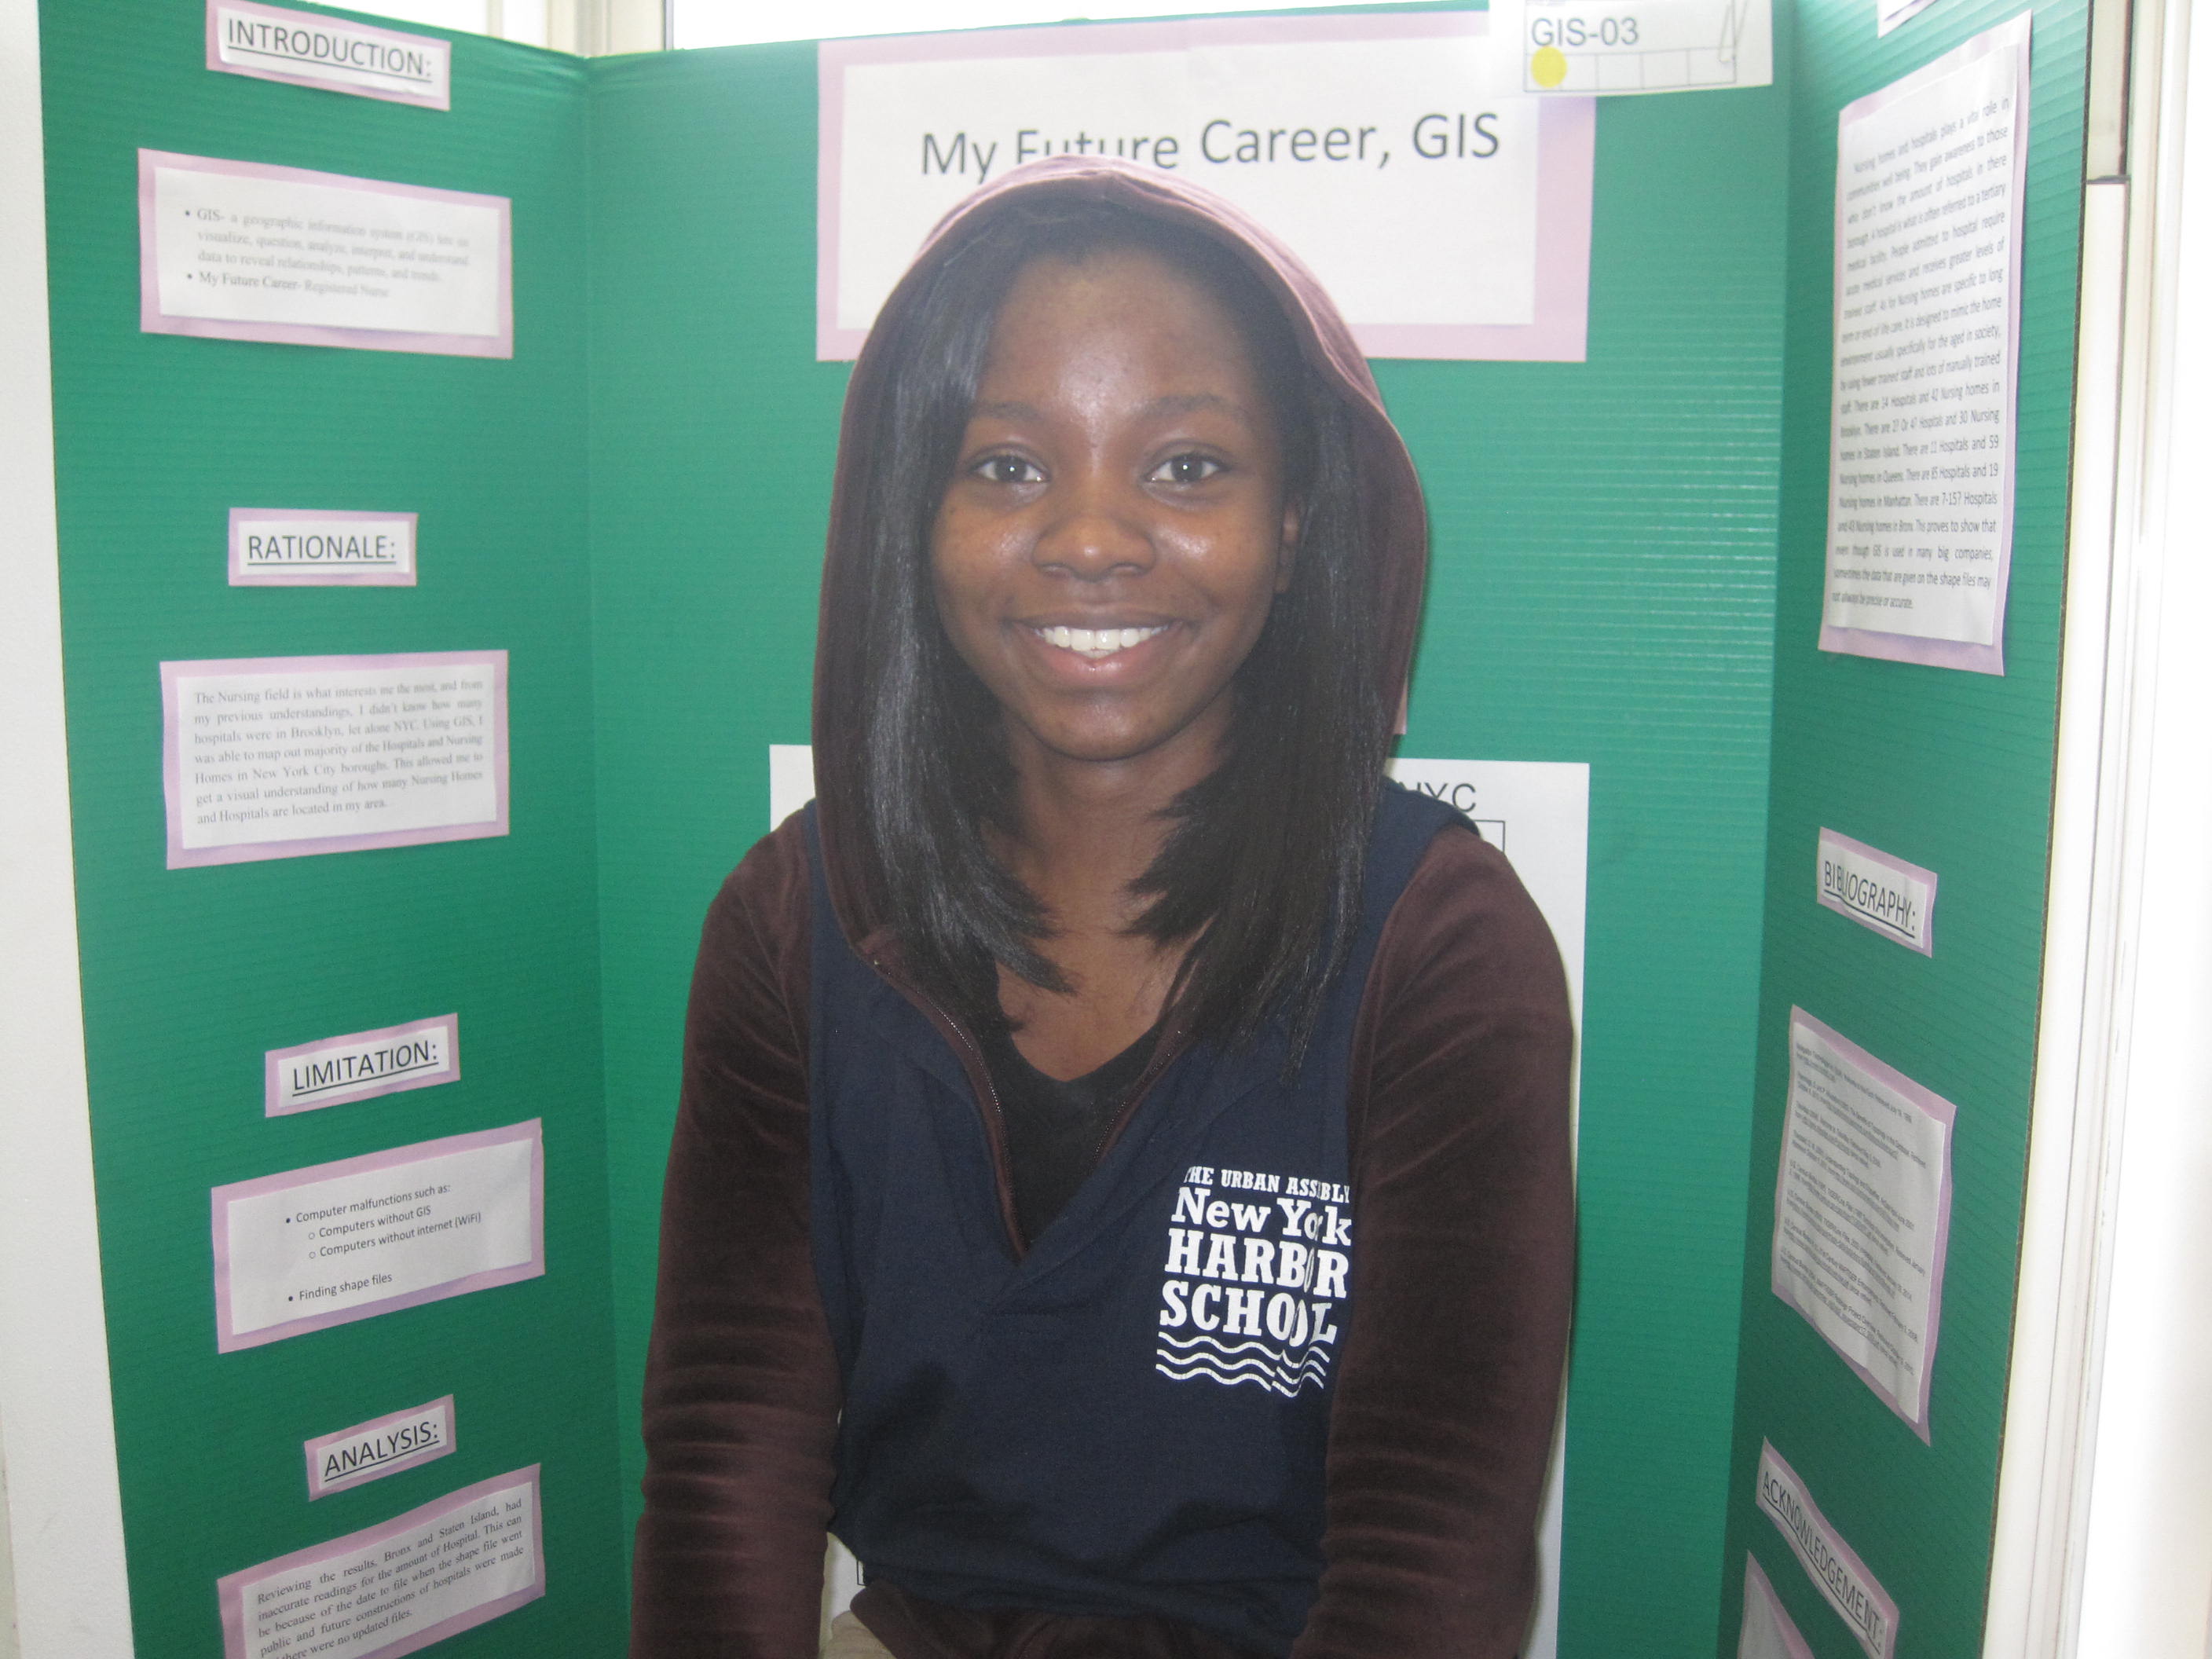 Makeda, Advanced Marine Research Scholar, at the New York Harbor School 3rd Annual Science Symposium